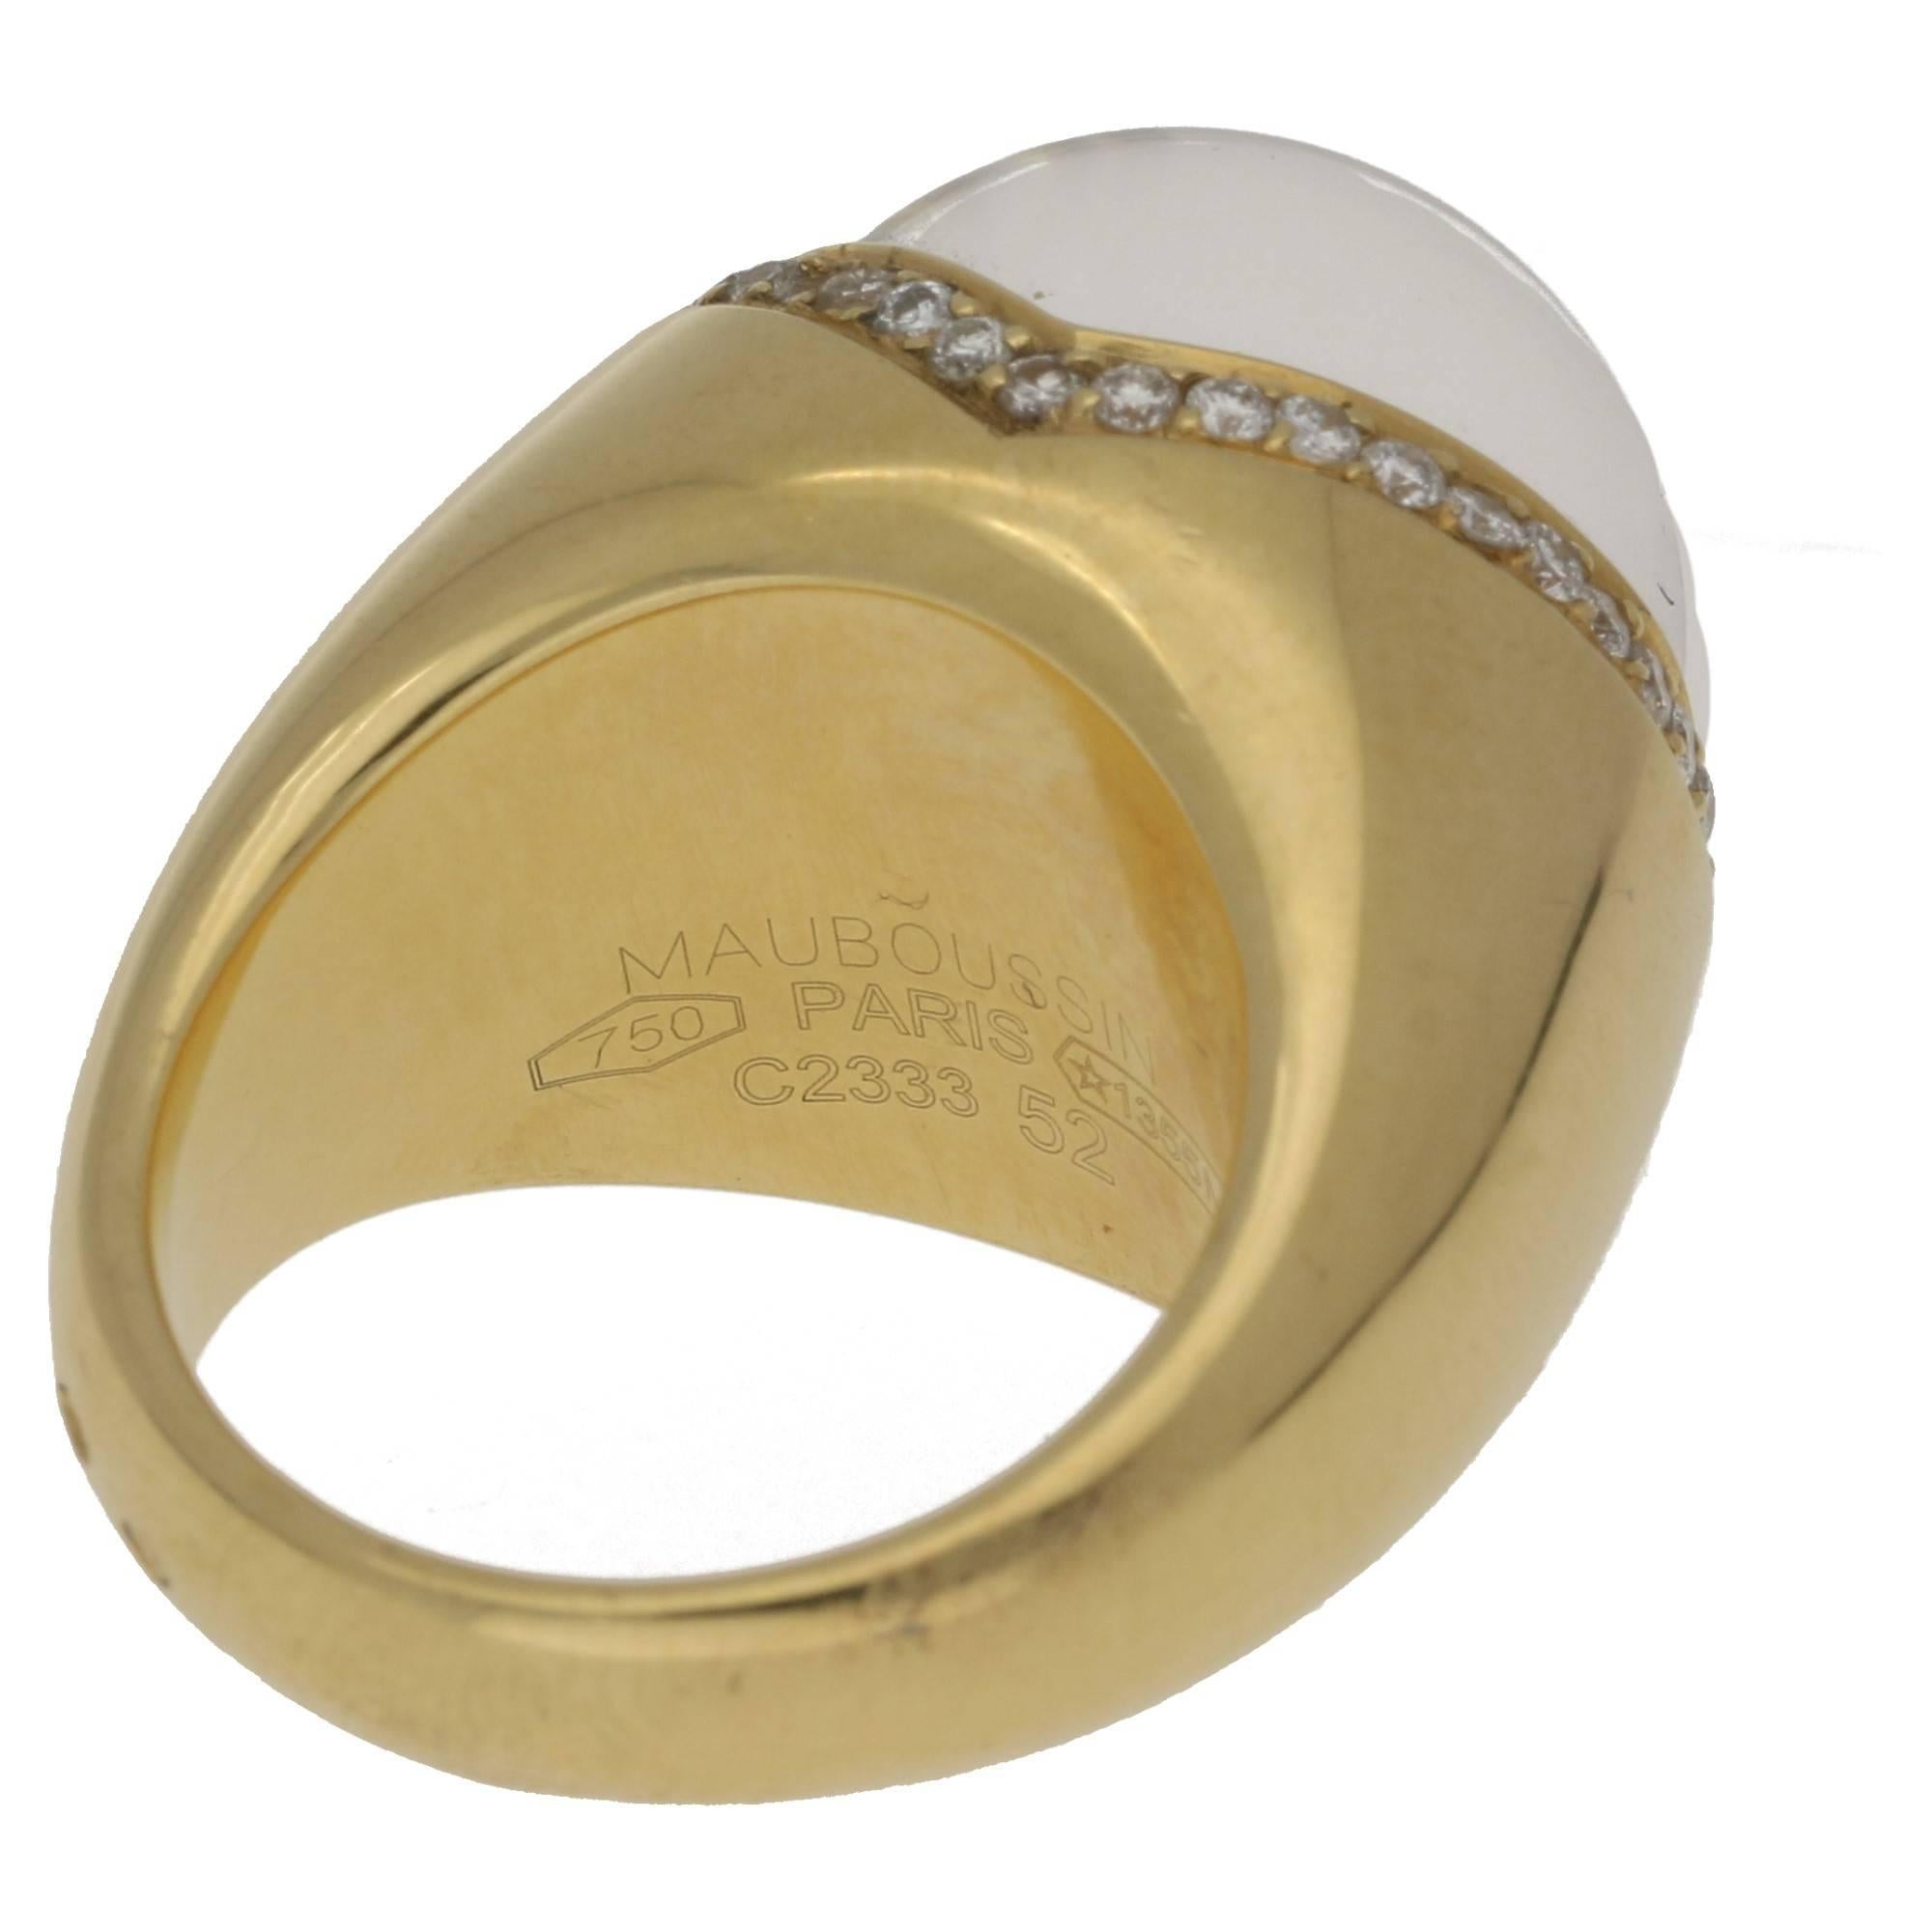 A signed Mauboussin ring in 18ct yellow gold, featuring a flush set 0.40ct round brilliant cut diamond set under a domed cabochon of rock quartz with a grain set diamond double v-shaped border of forty round brilliant cut diamonds, estimated as G/H